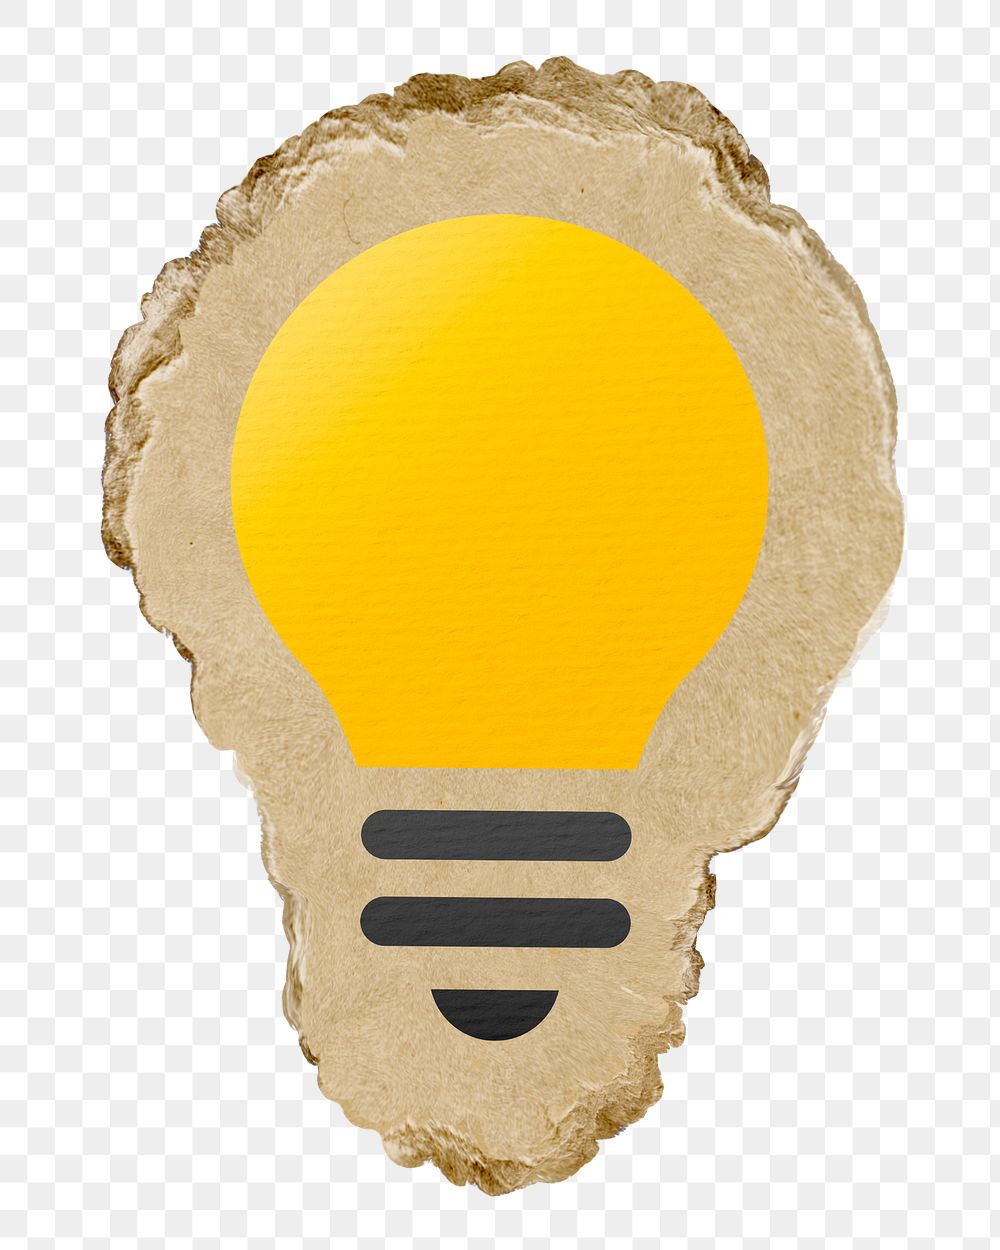 Light bulb png sticker, ripped paper, transparent background